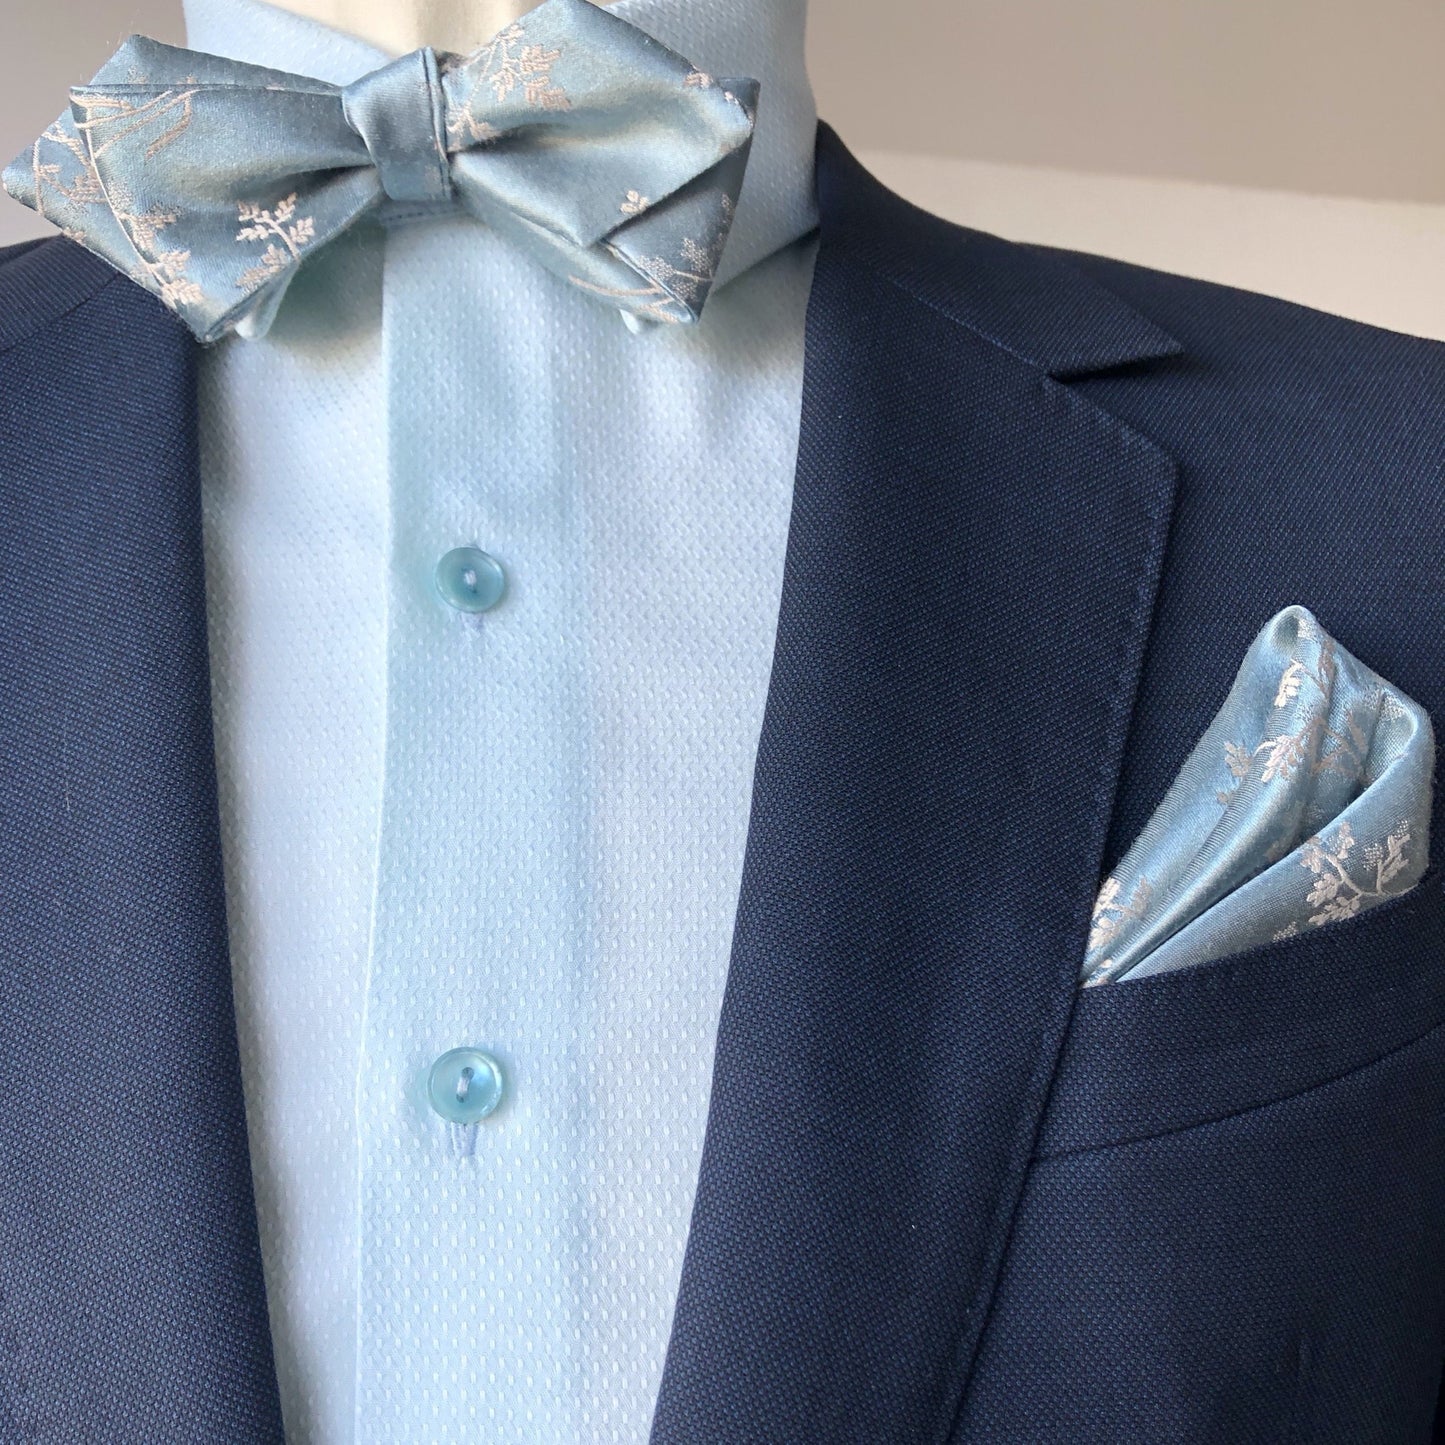 Dusty Blue Diamond Tip Bow tie with Dusty Blue Pocket Square by German Valdivia 